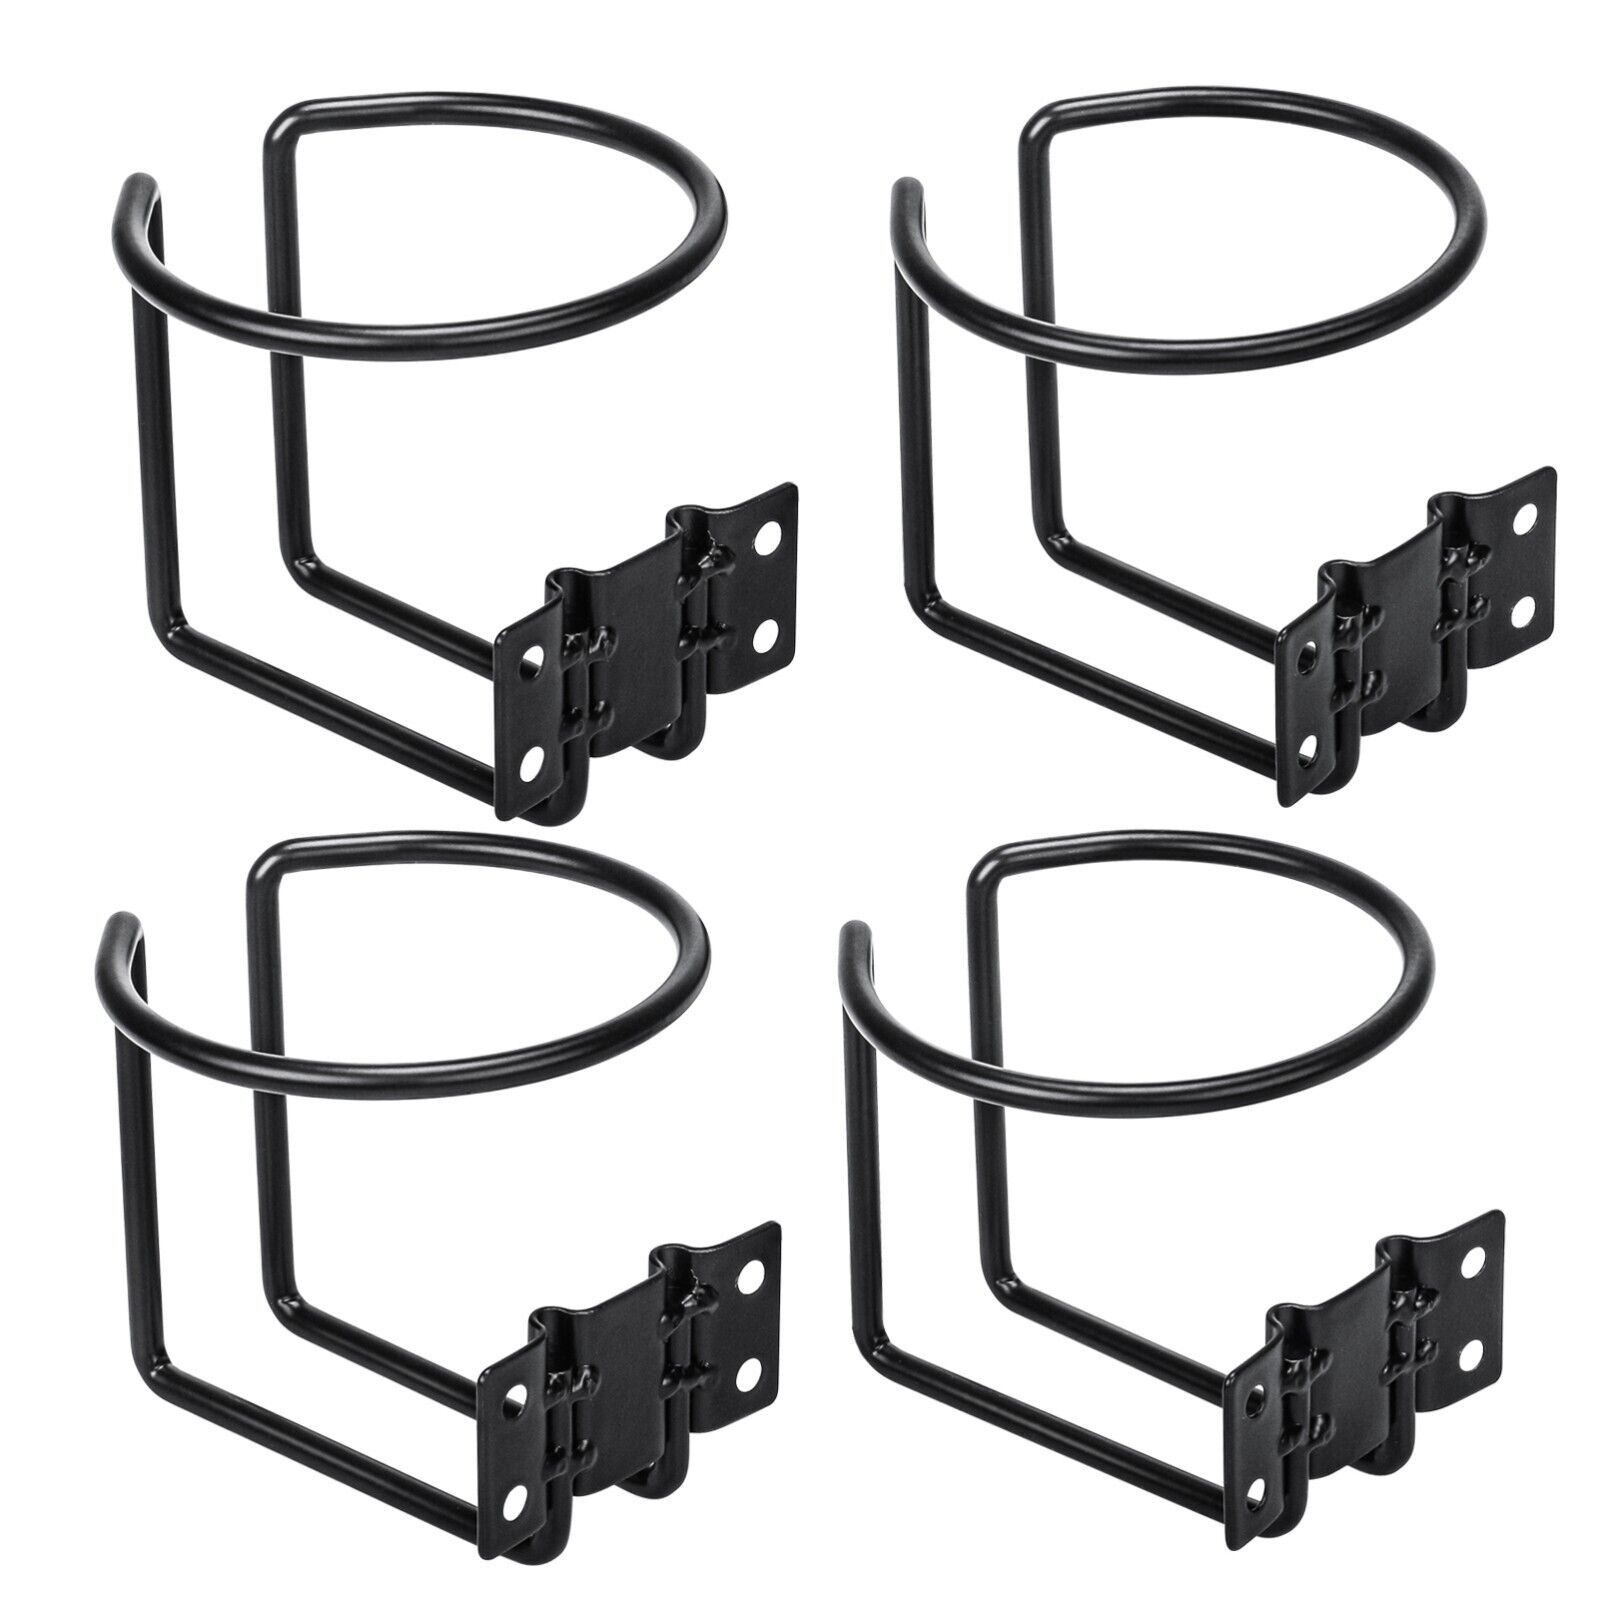 4 pcs Black Coating Ring Boat Cup Holder,Stainless Steel Universal Drink Holders